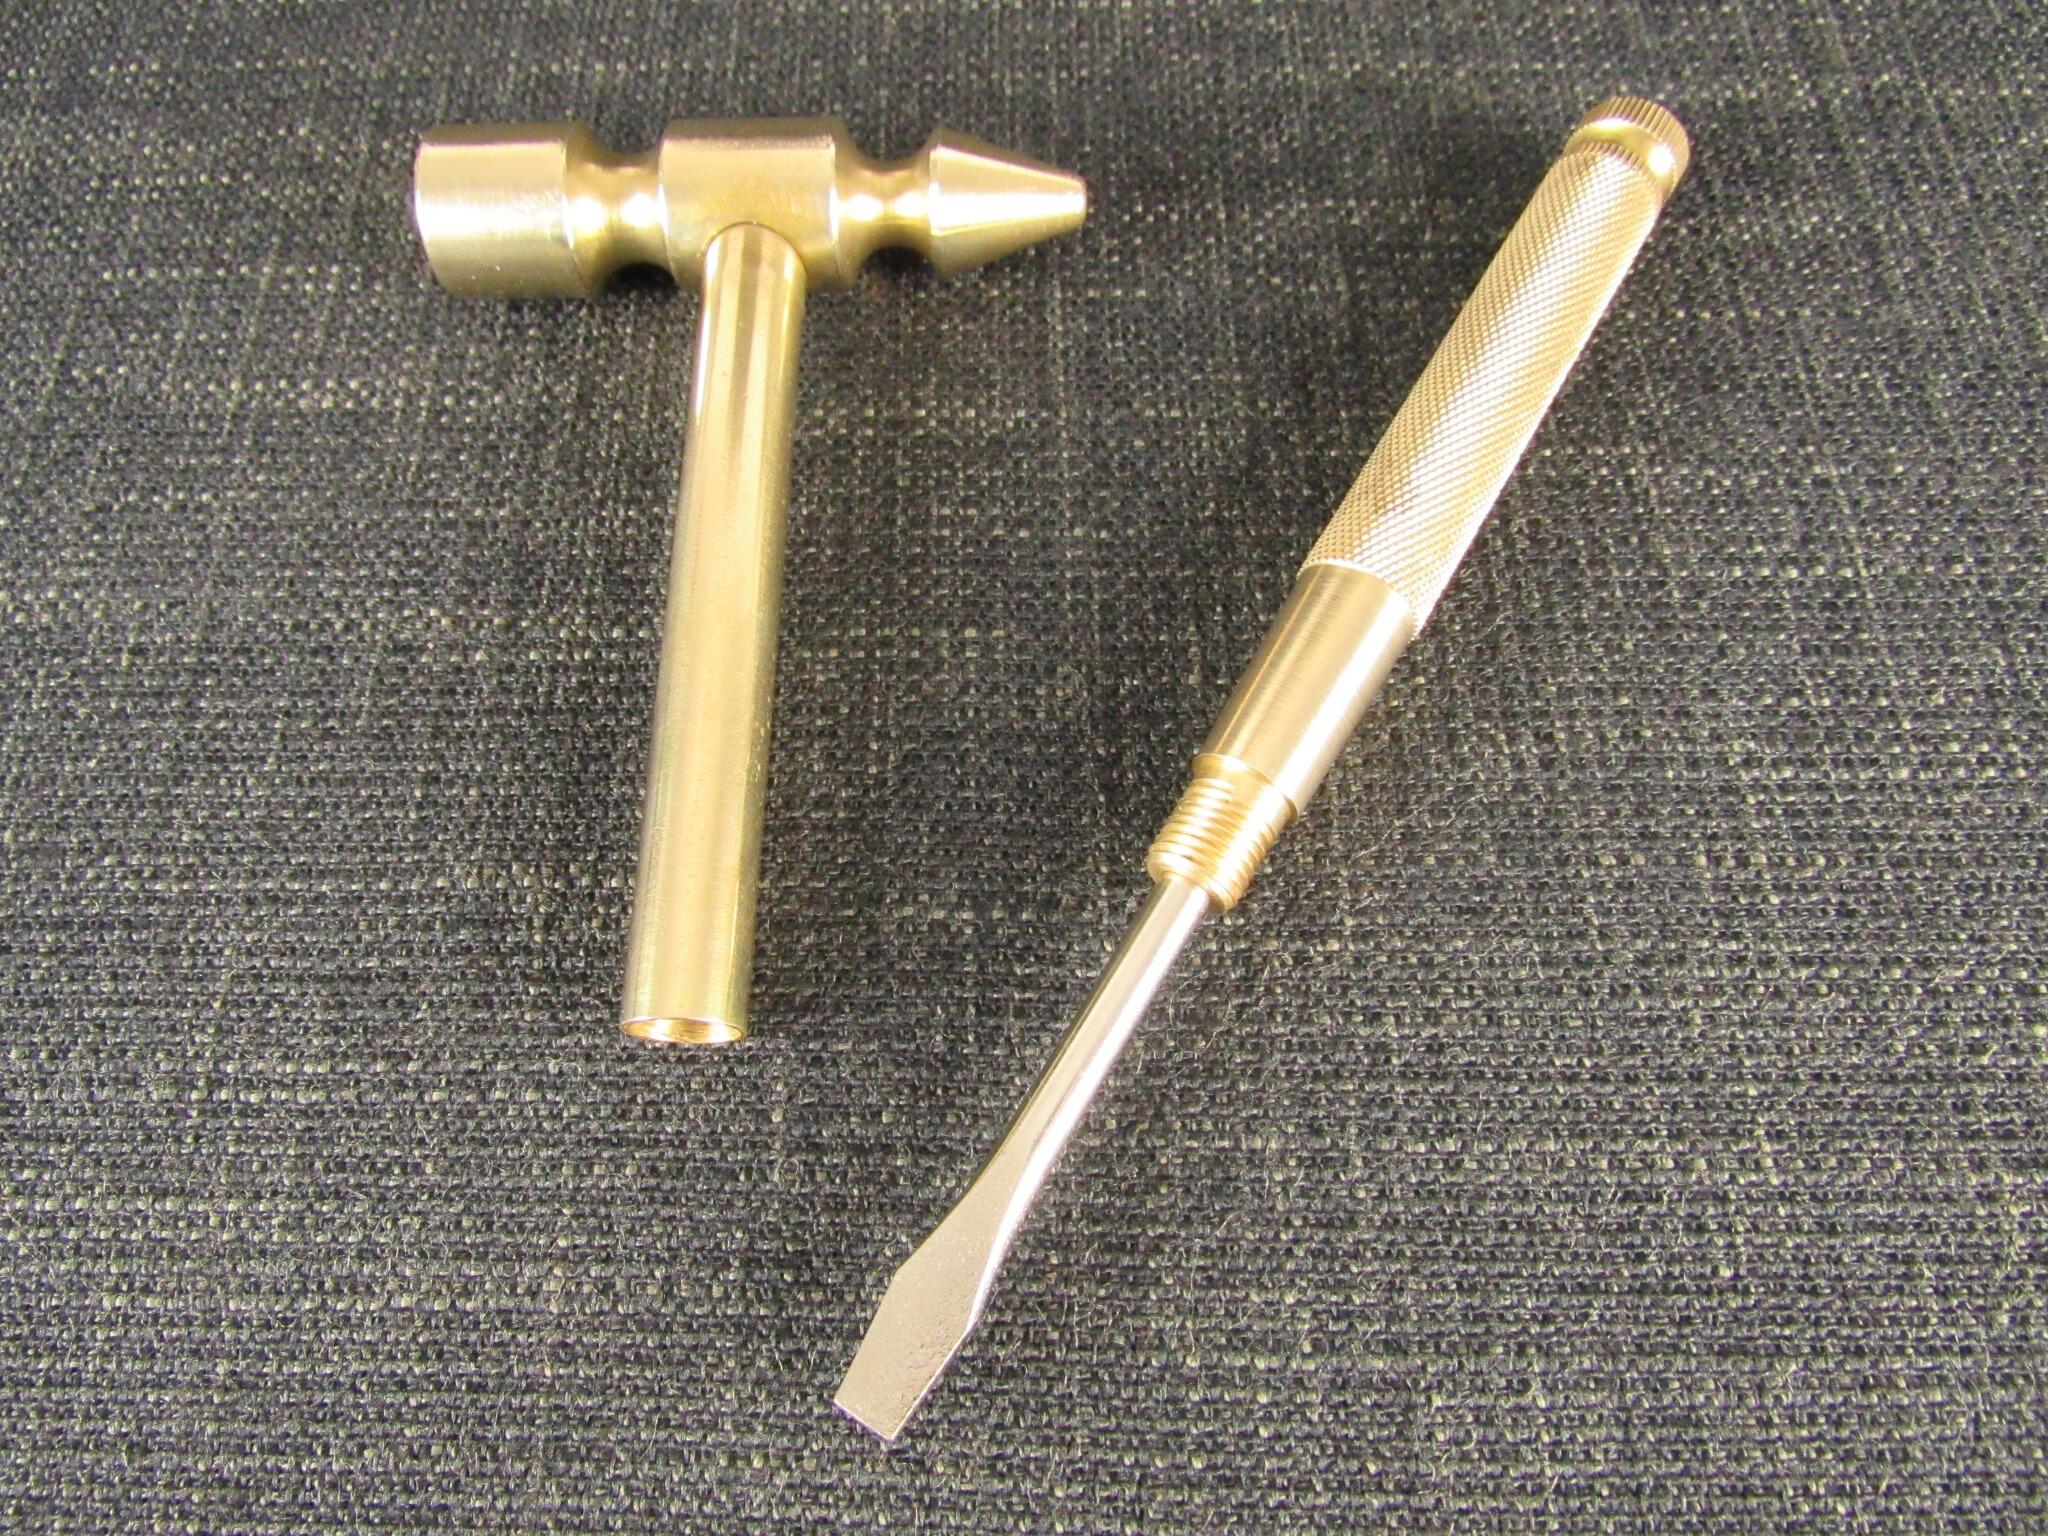 4 OZ. Small Brass Hammer Knurled 5/8 Aluminum Handle Excellent